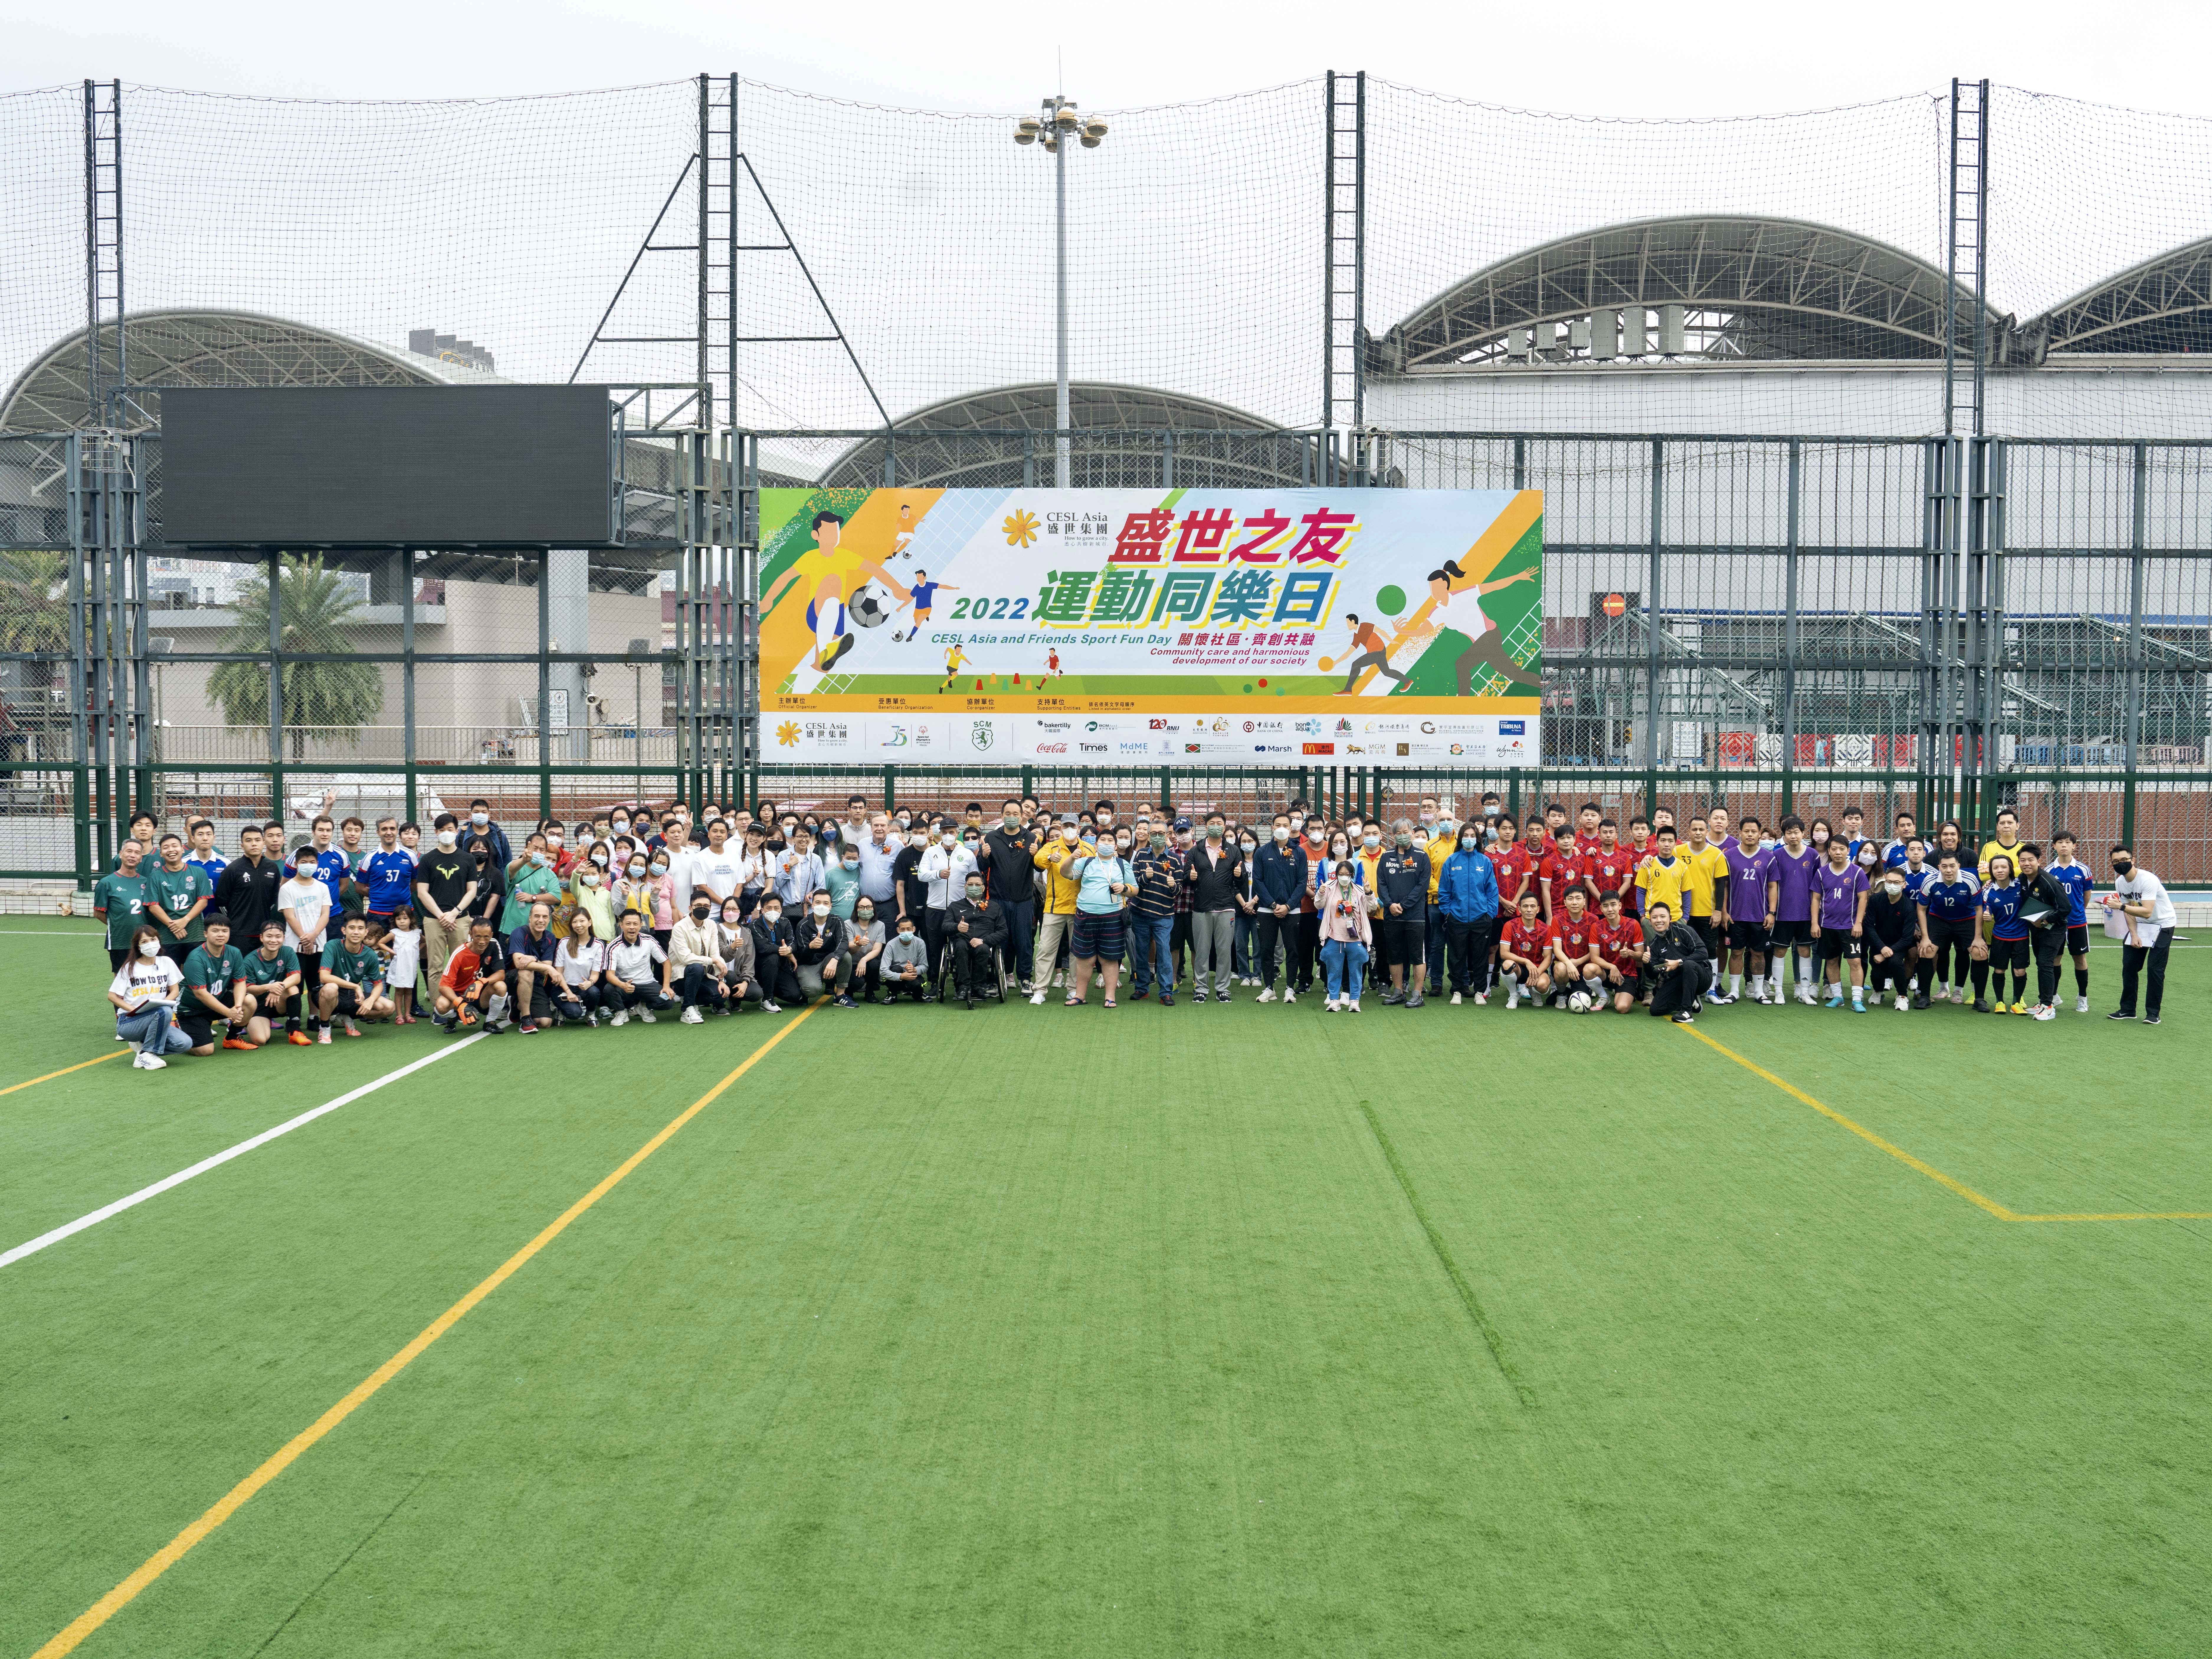 “CESL Asia and Friends Sport Fun Day” unleashes inclusion through the joy of sports for the sixth consecutive year  